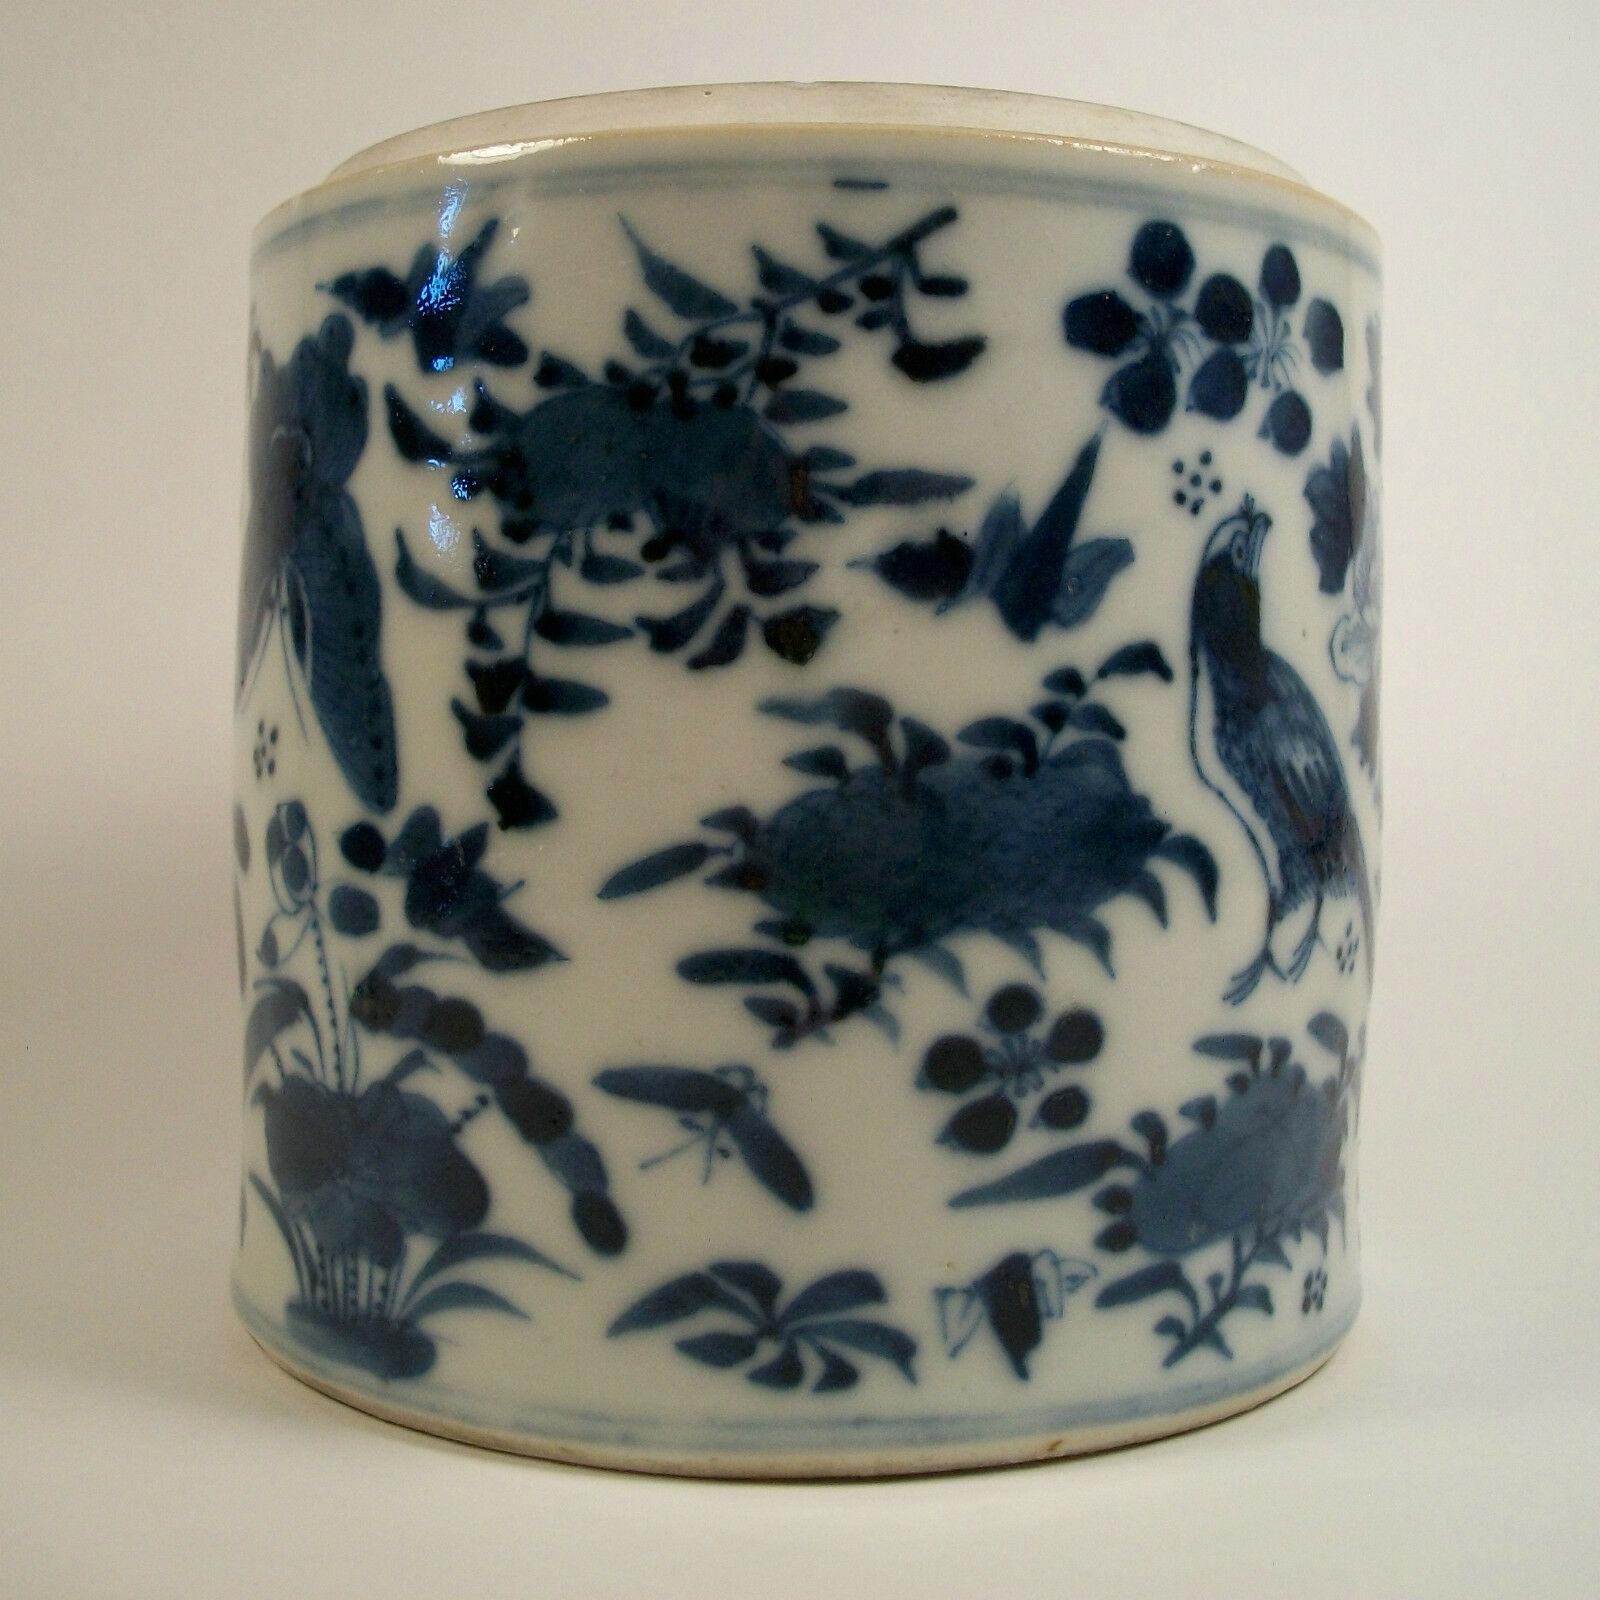 Glazed Antique Blue & White Porcelain Tea Caddy, Hand Painted, China, 19th Century For Sale